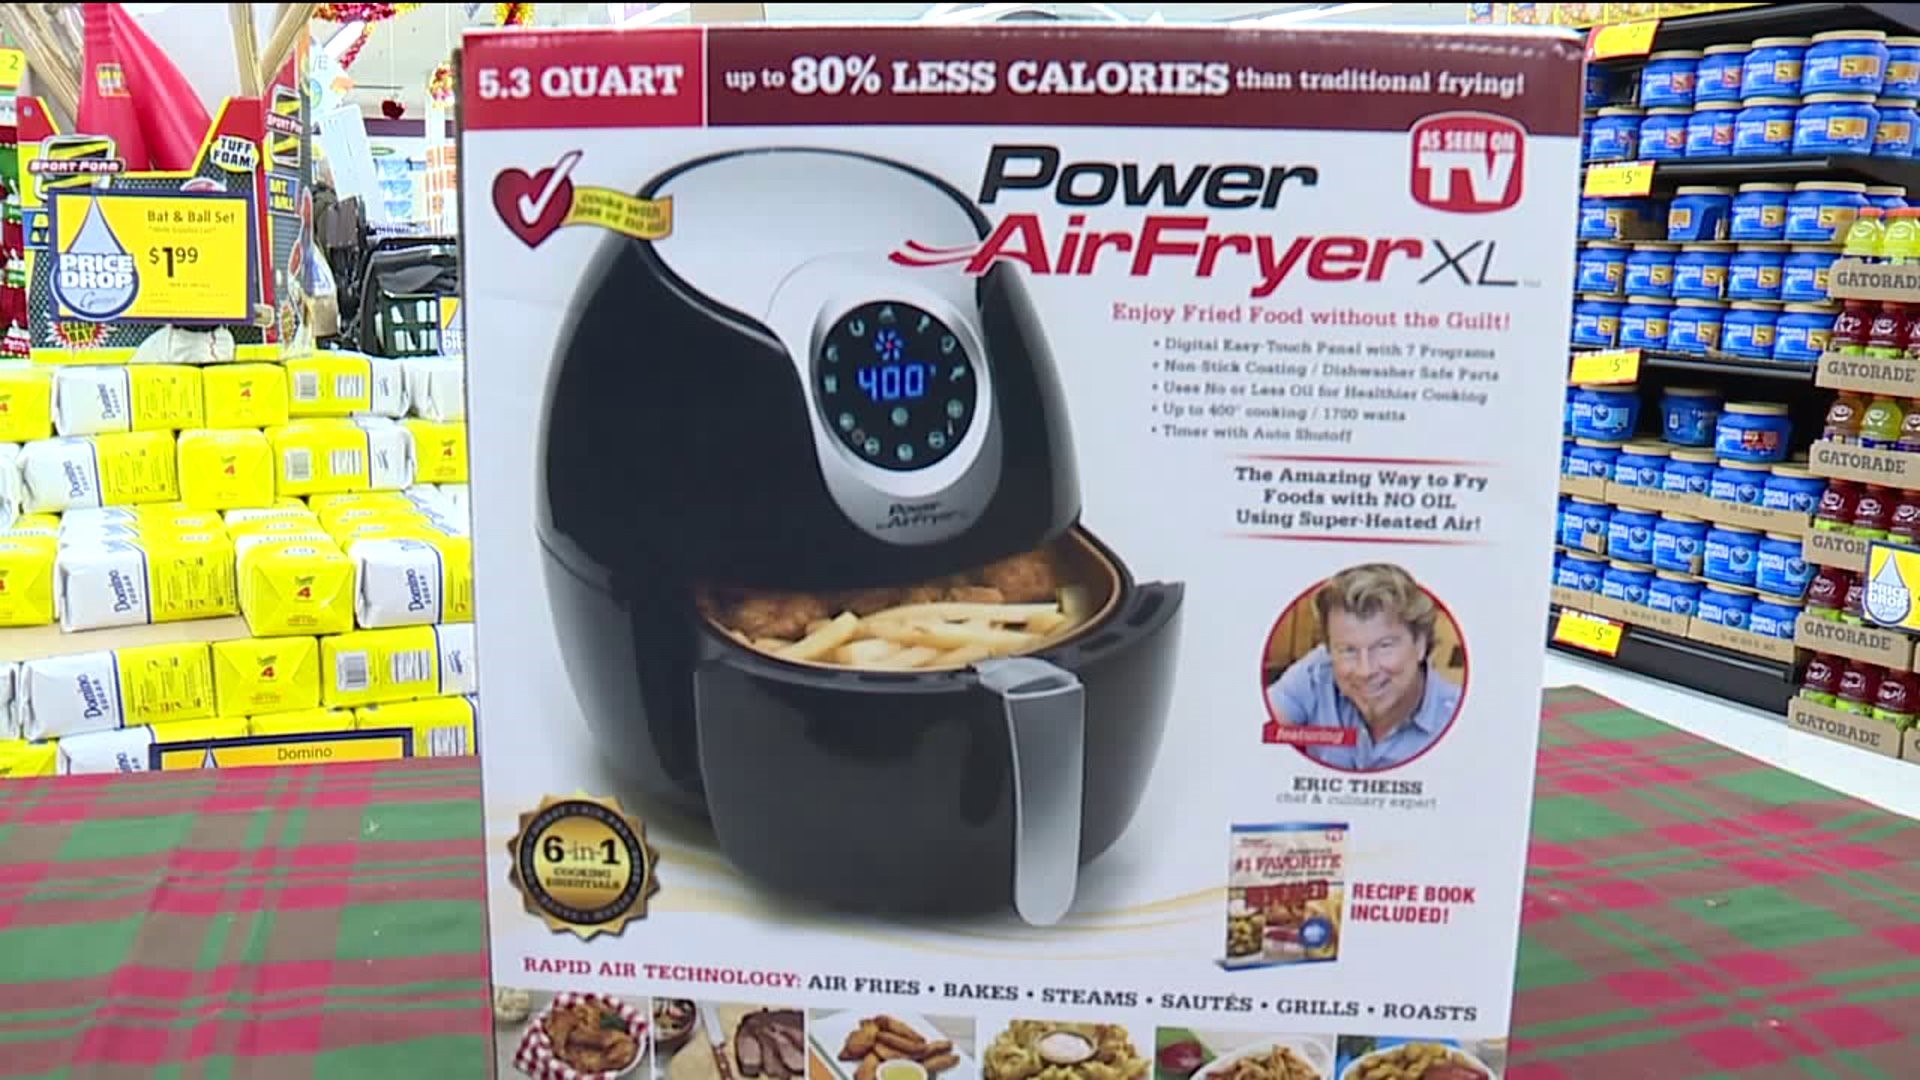 Does it Really Work: Power Air Fryer XL